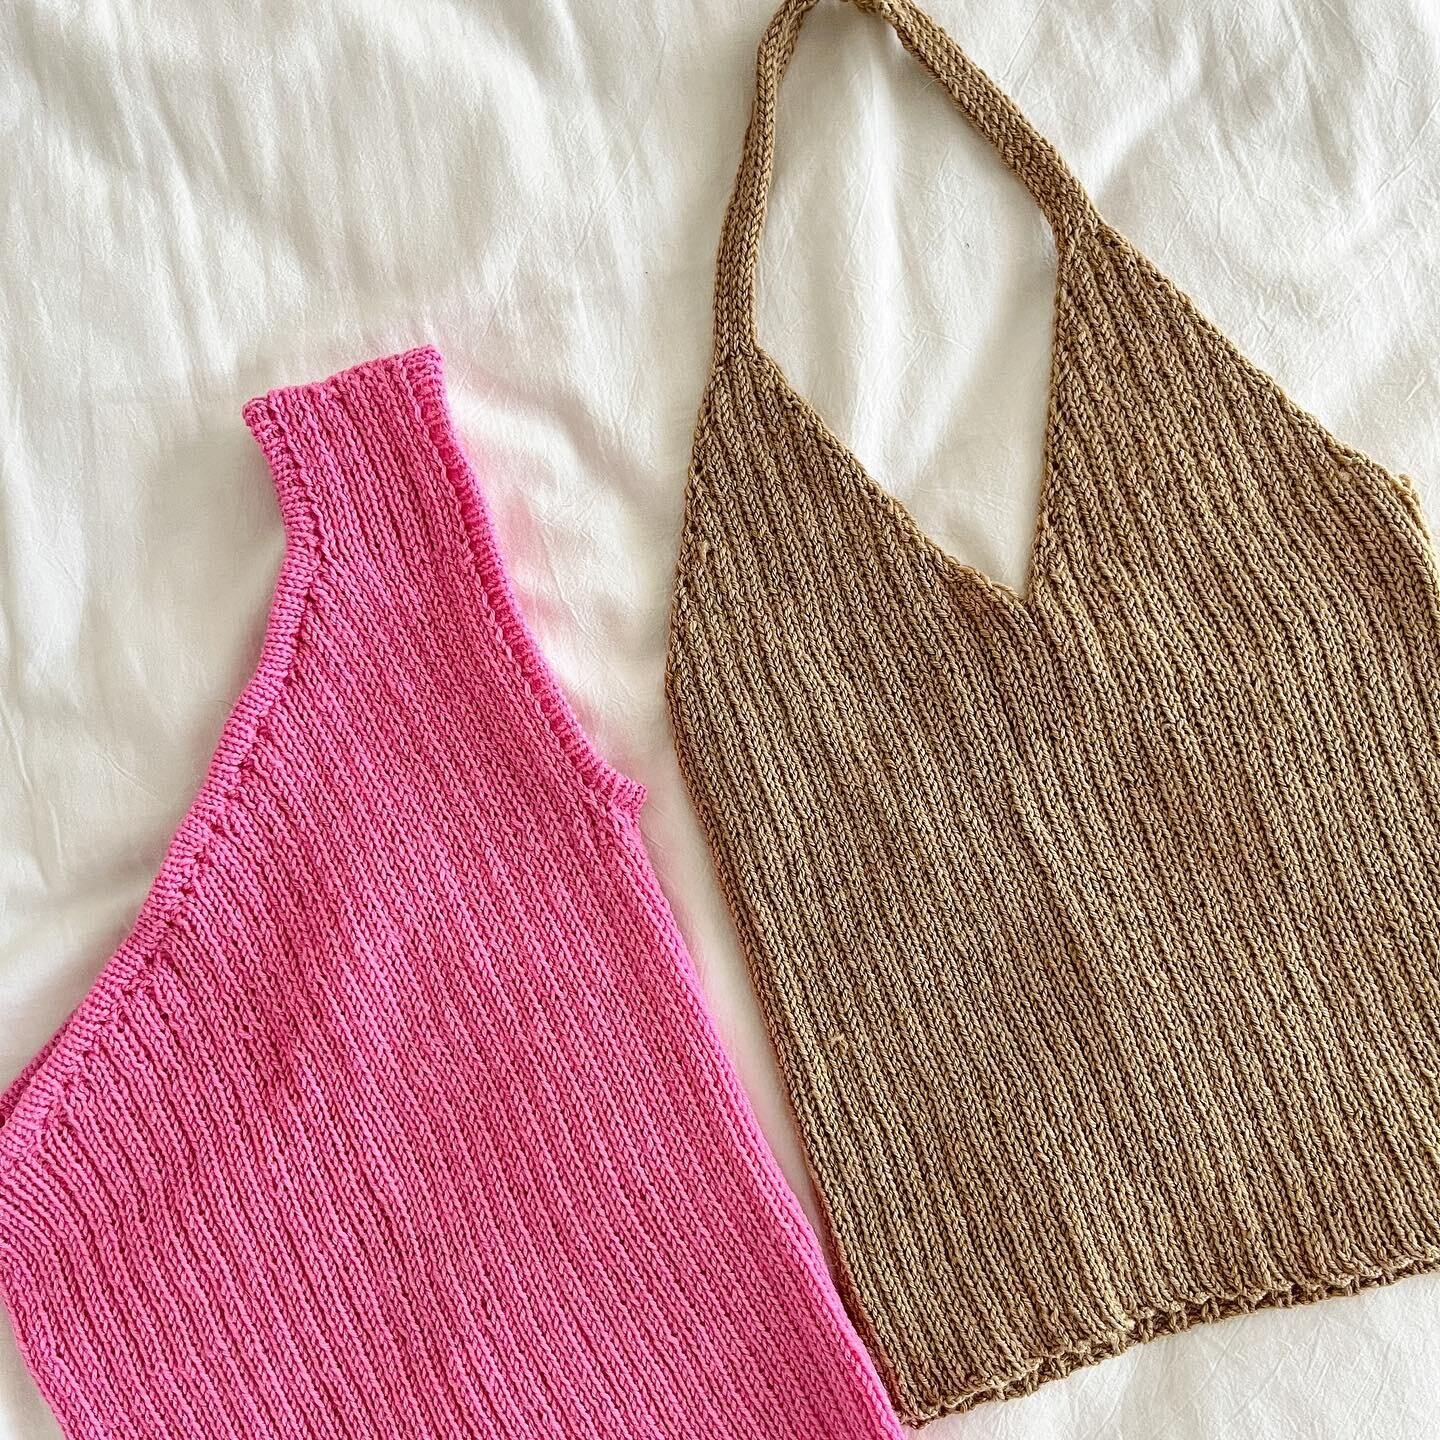 Some new additions to the &lsquo;lost&rsquo; family of patterns, The Lost Halter and The Lost One Shoulder, testing will be soon when I get my new year new me act together and write the patterns up 👌. Which will you guys make first? 

Yarn: @hobbii_